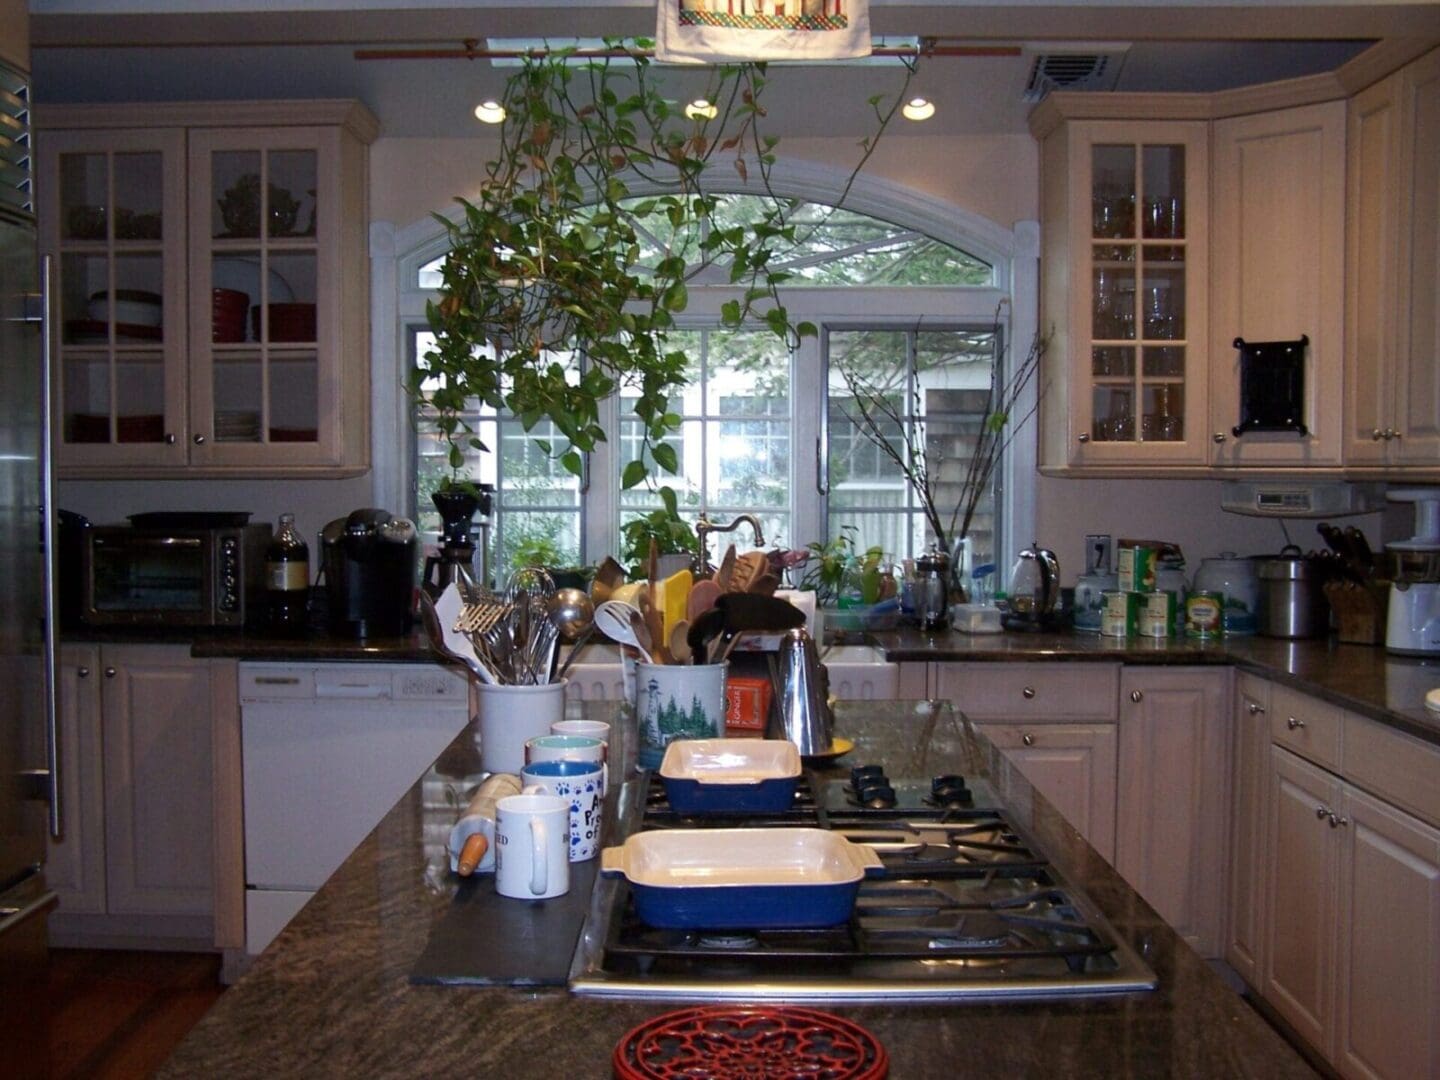 This is a kitchen where you can find repairs and maintenance for your home's interior.